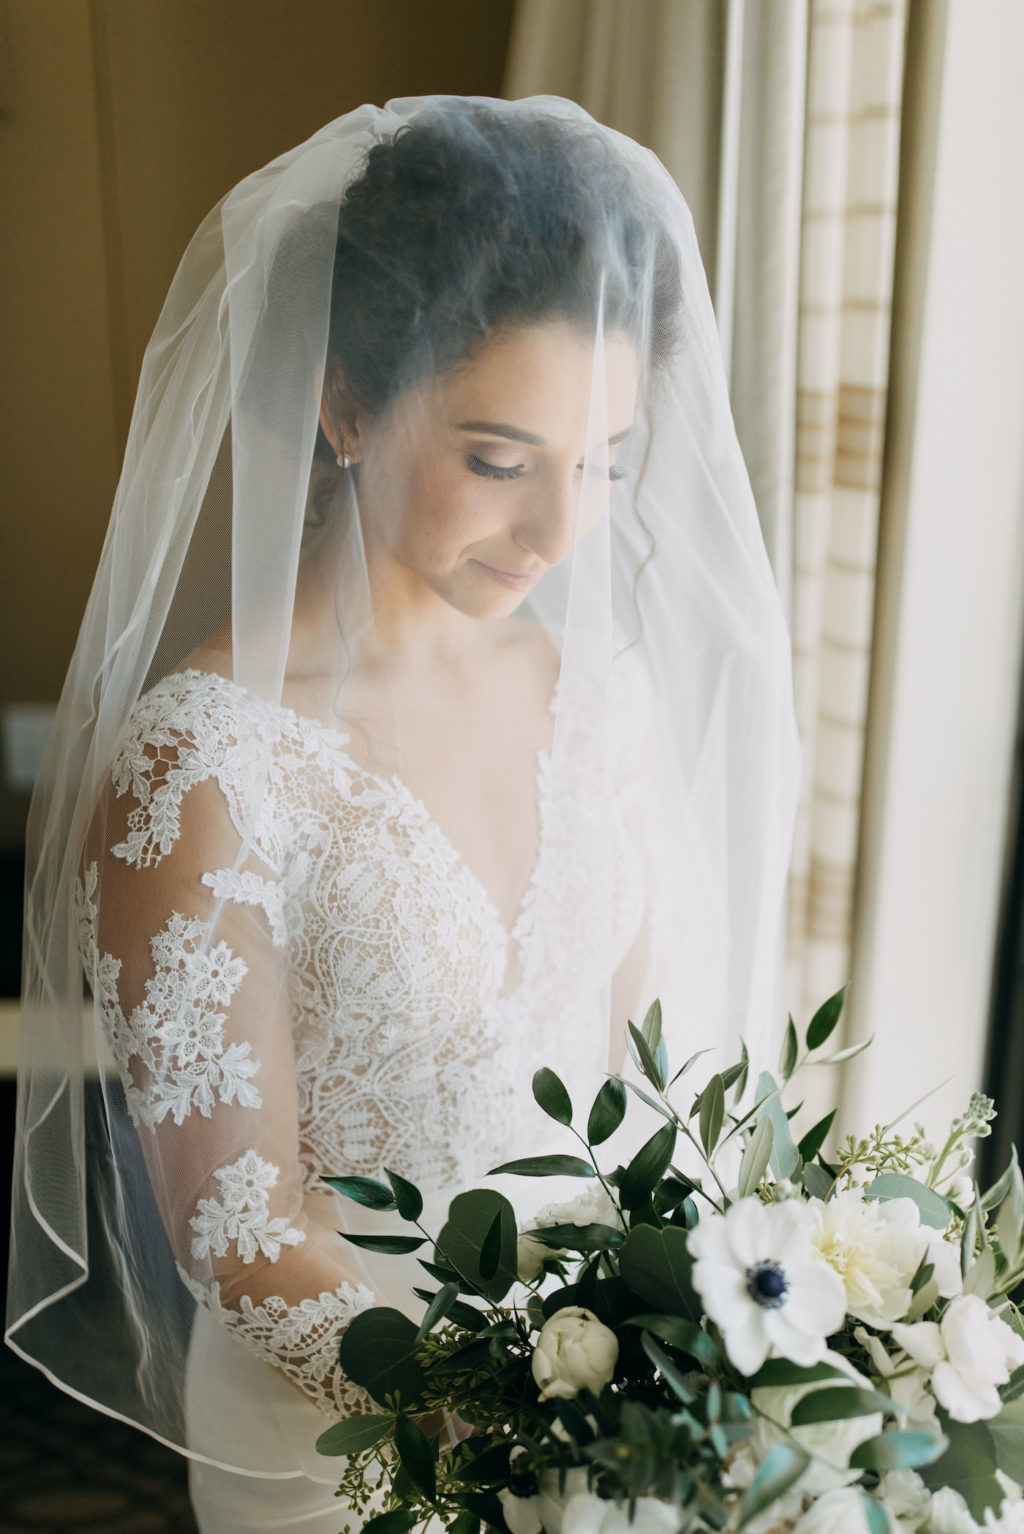 Classic Tampa Bay Bridal Portrait, Bride with Veil in Timeless White Illusion Lace Long Sleeve Martina Liana Wedding Dress Holding Classic White Floral Bouquet with Greenery | Tampa Bay Wedding Hair and Makeup Artist Femme Akoi Beauty Studio | Florida Wedding Venue The Hotel Zamora